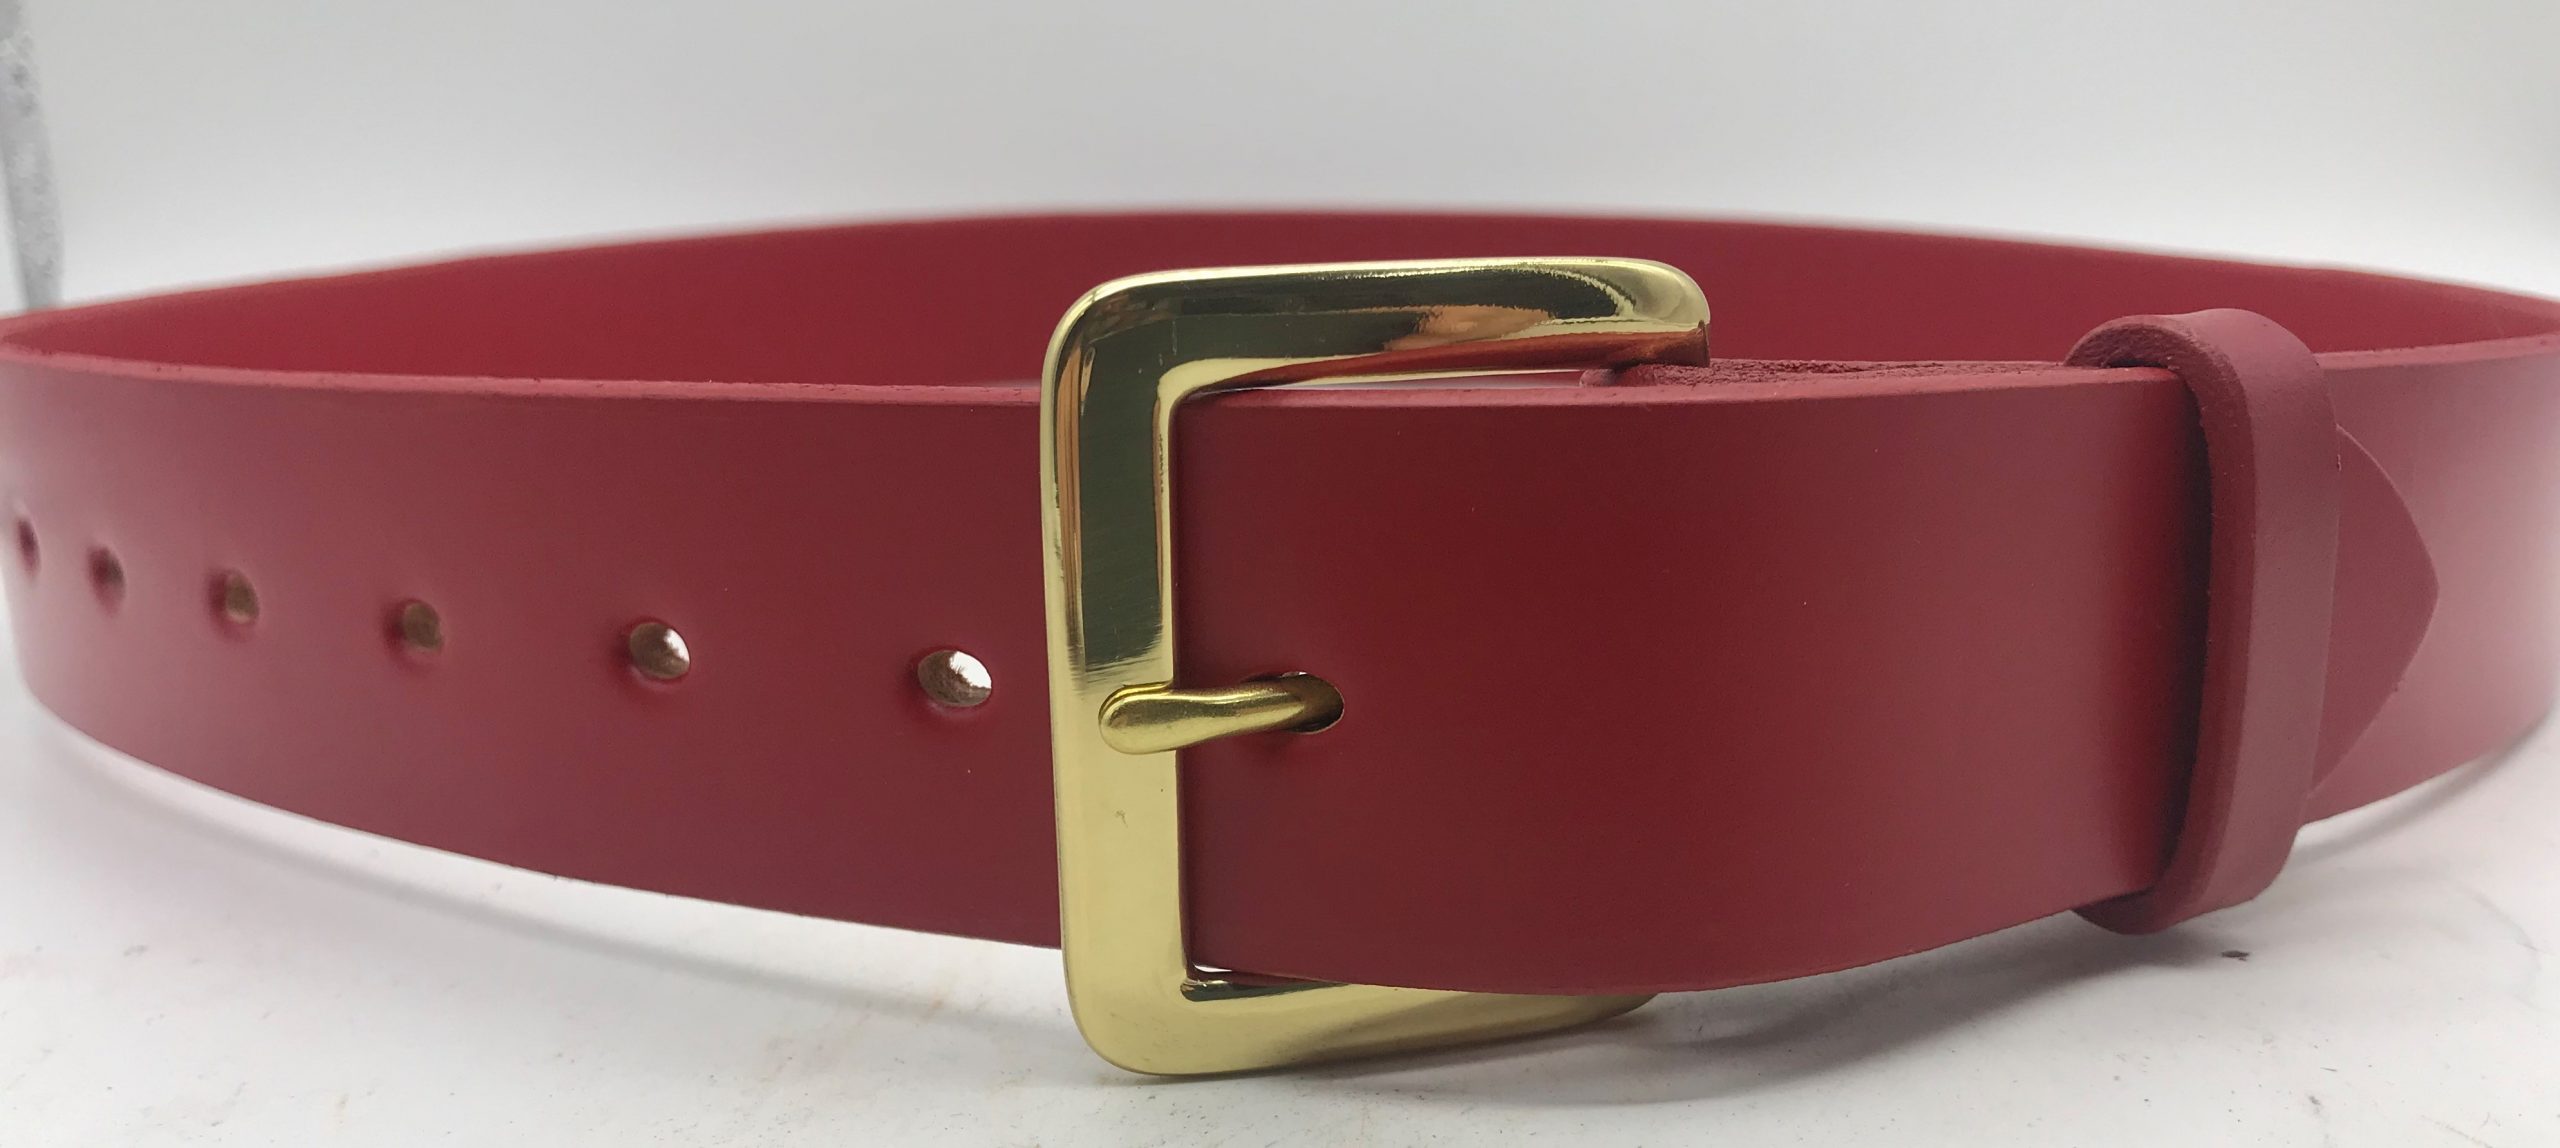 Red Leather Dress Belts for Santa and Mrs. Claus - Shop Classic Claus